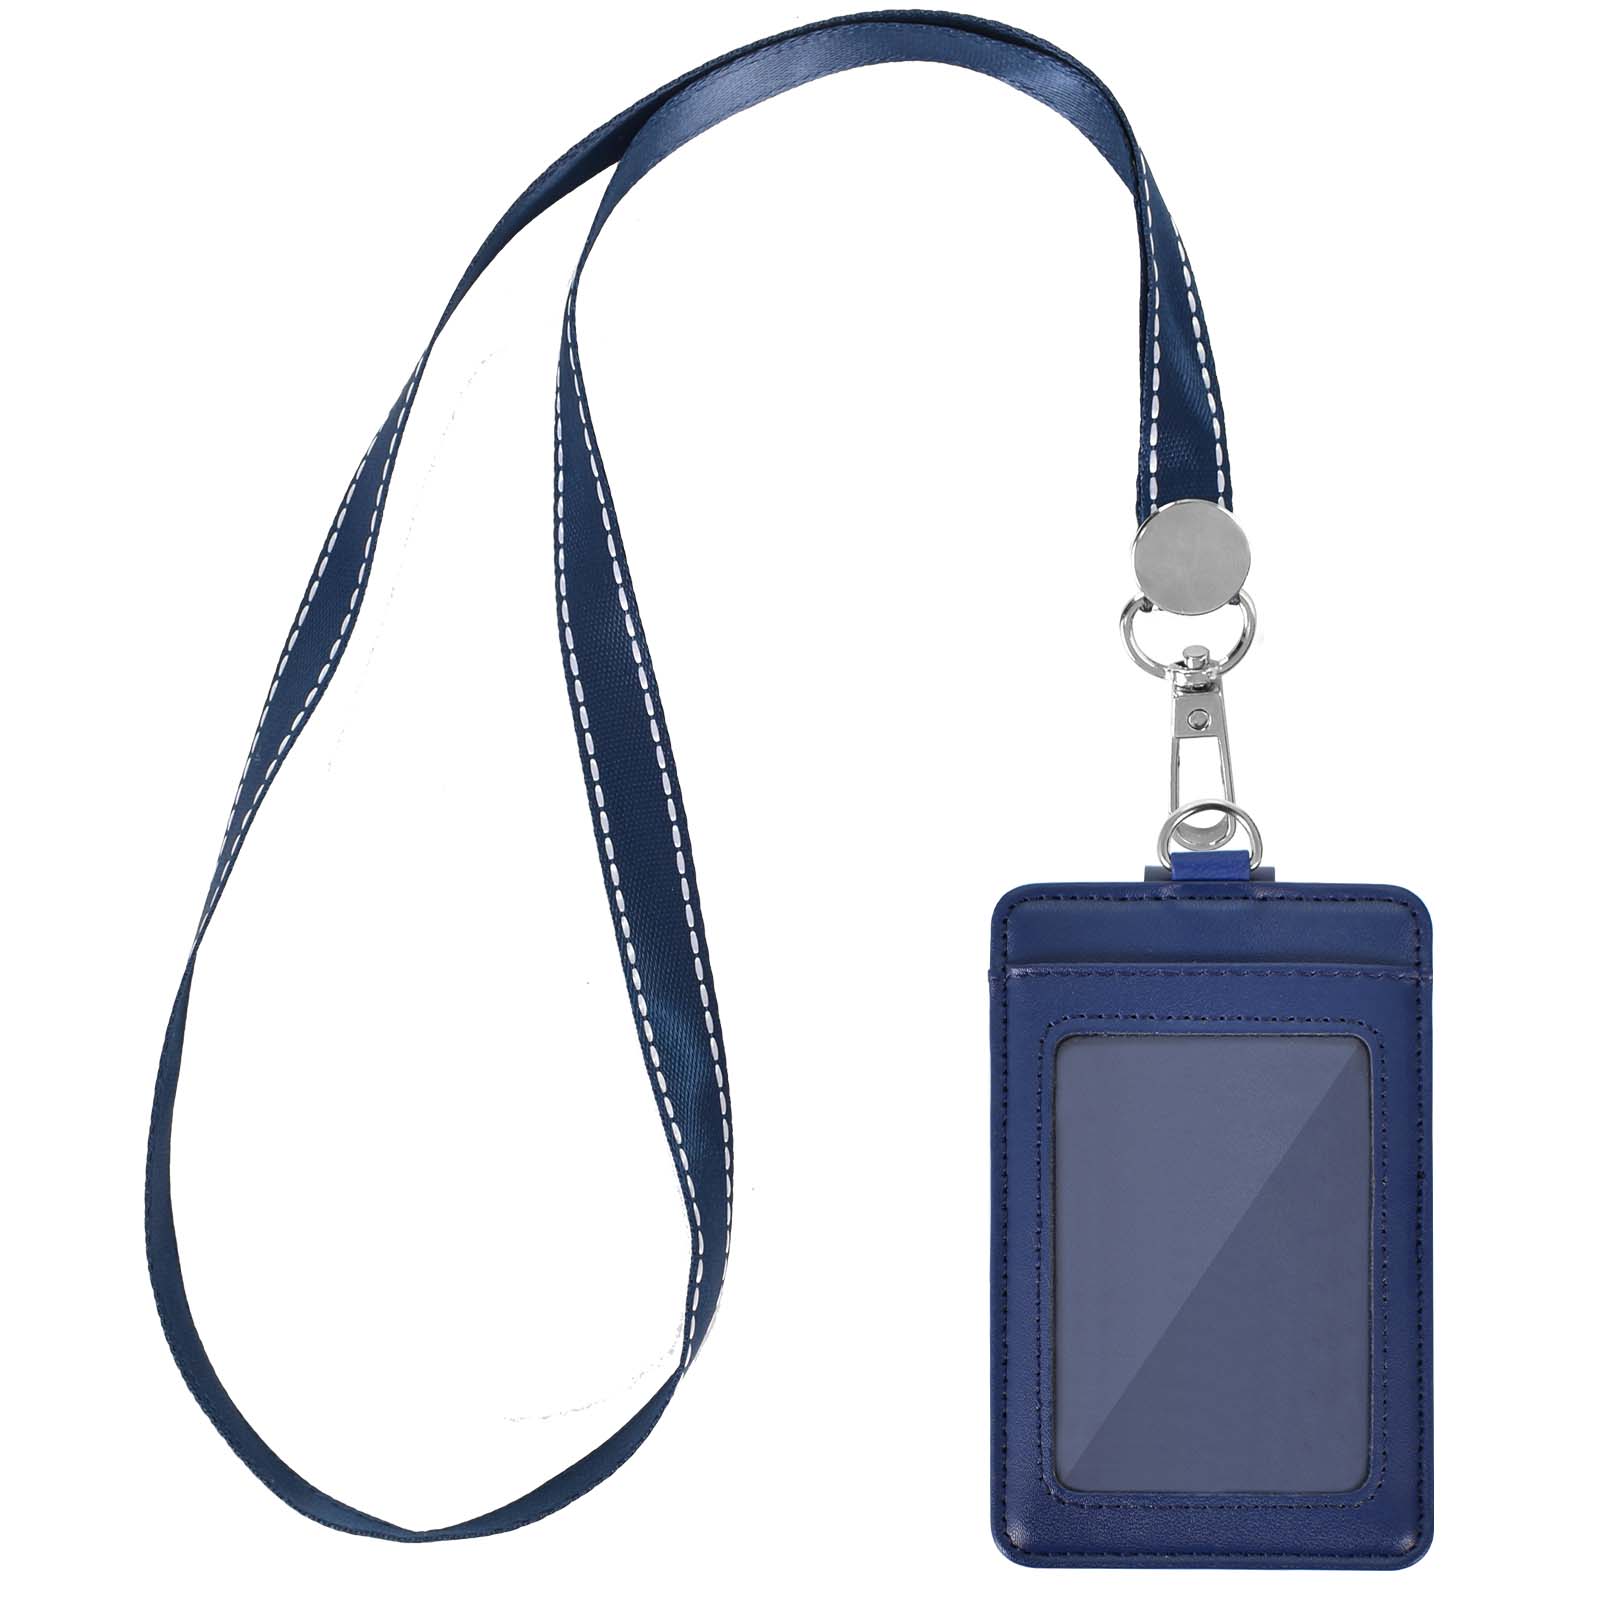 ID Badge Holder with Lanyard, Vertical PU Leather ID Badge Card Holder with 1 Clear ID Window, 4 Credit Card Slots and a Detachable Neck Lanyard